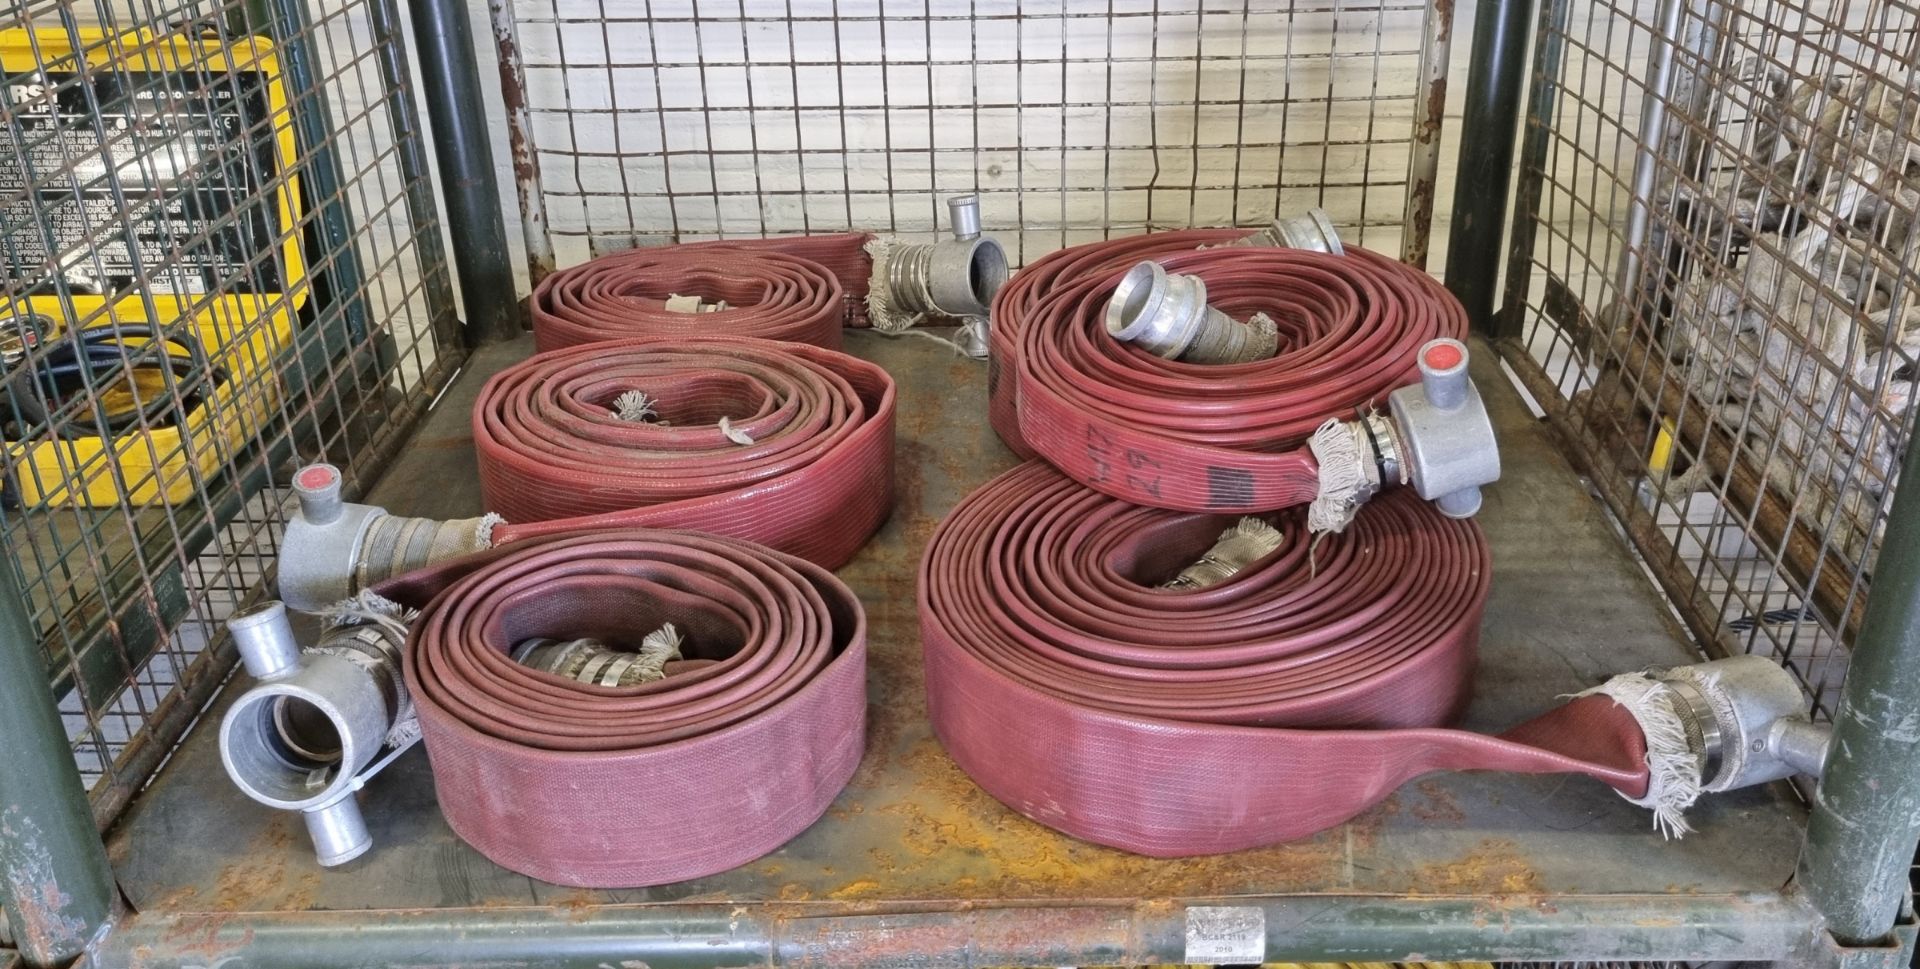 Angus Duraline 45mm lay flat hose with couplings - approx 10m in length, 2x Angus Duraline 64mm - Bild 2 aus 4